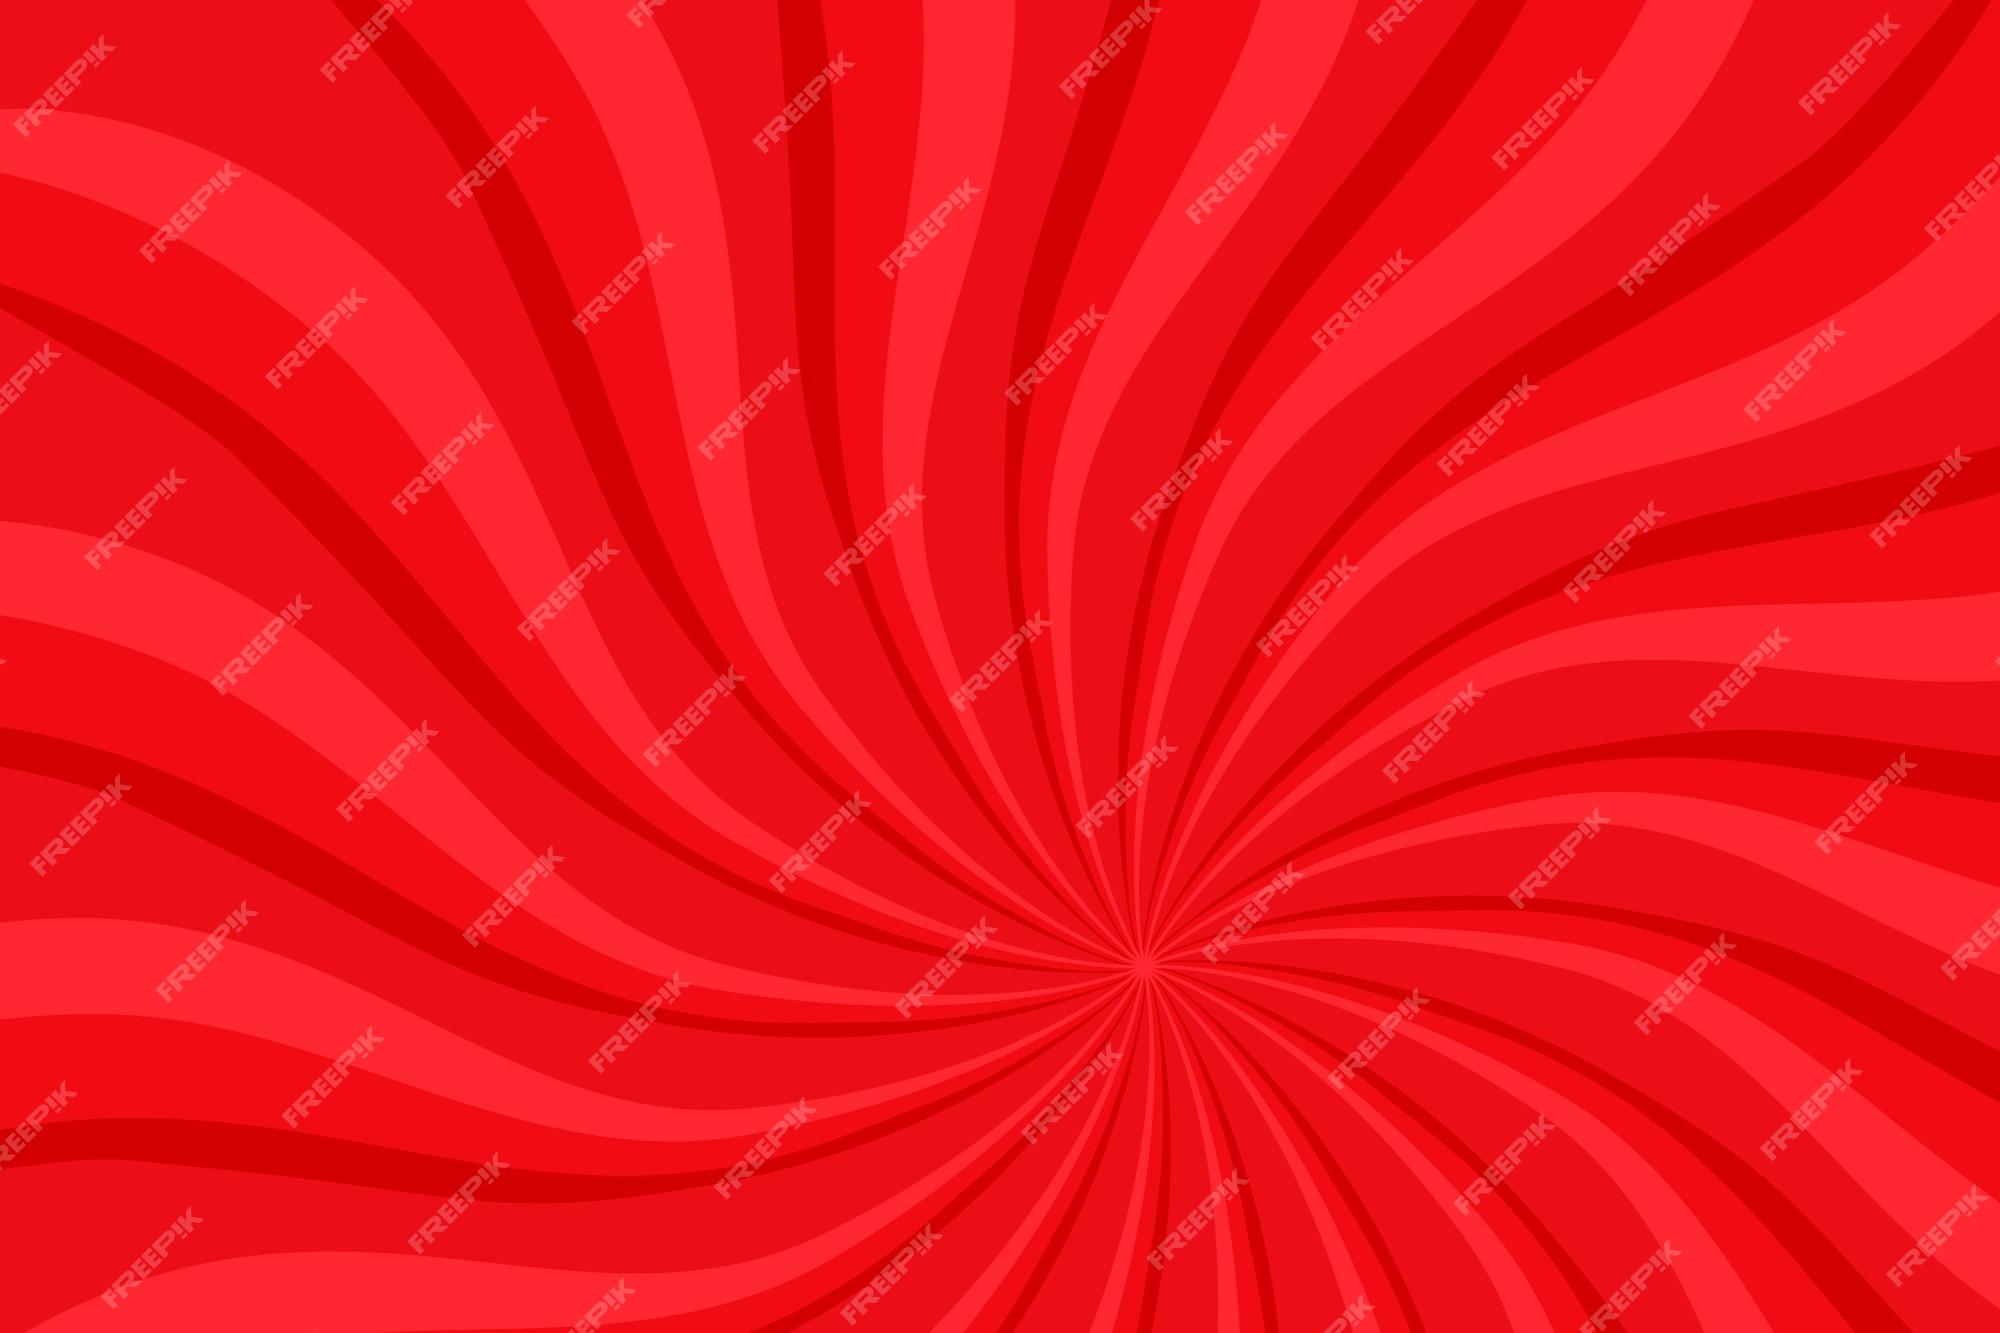 Red Ray Background Images - Free Download on Freepik